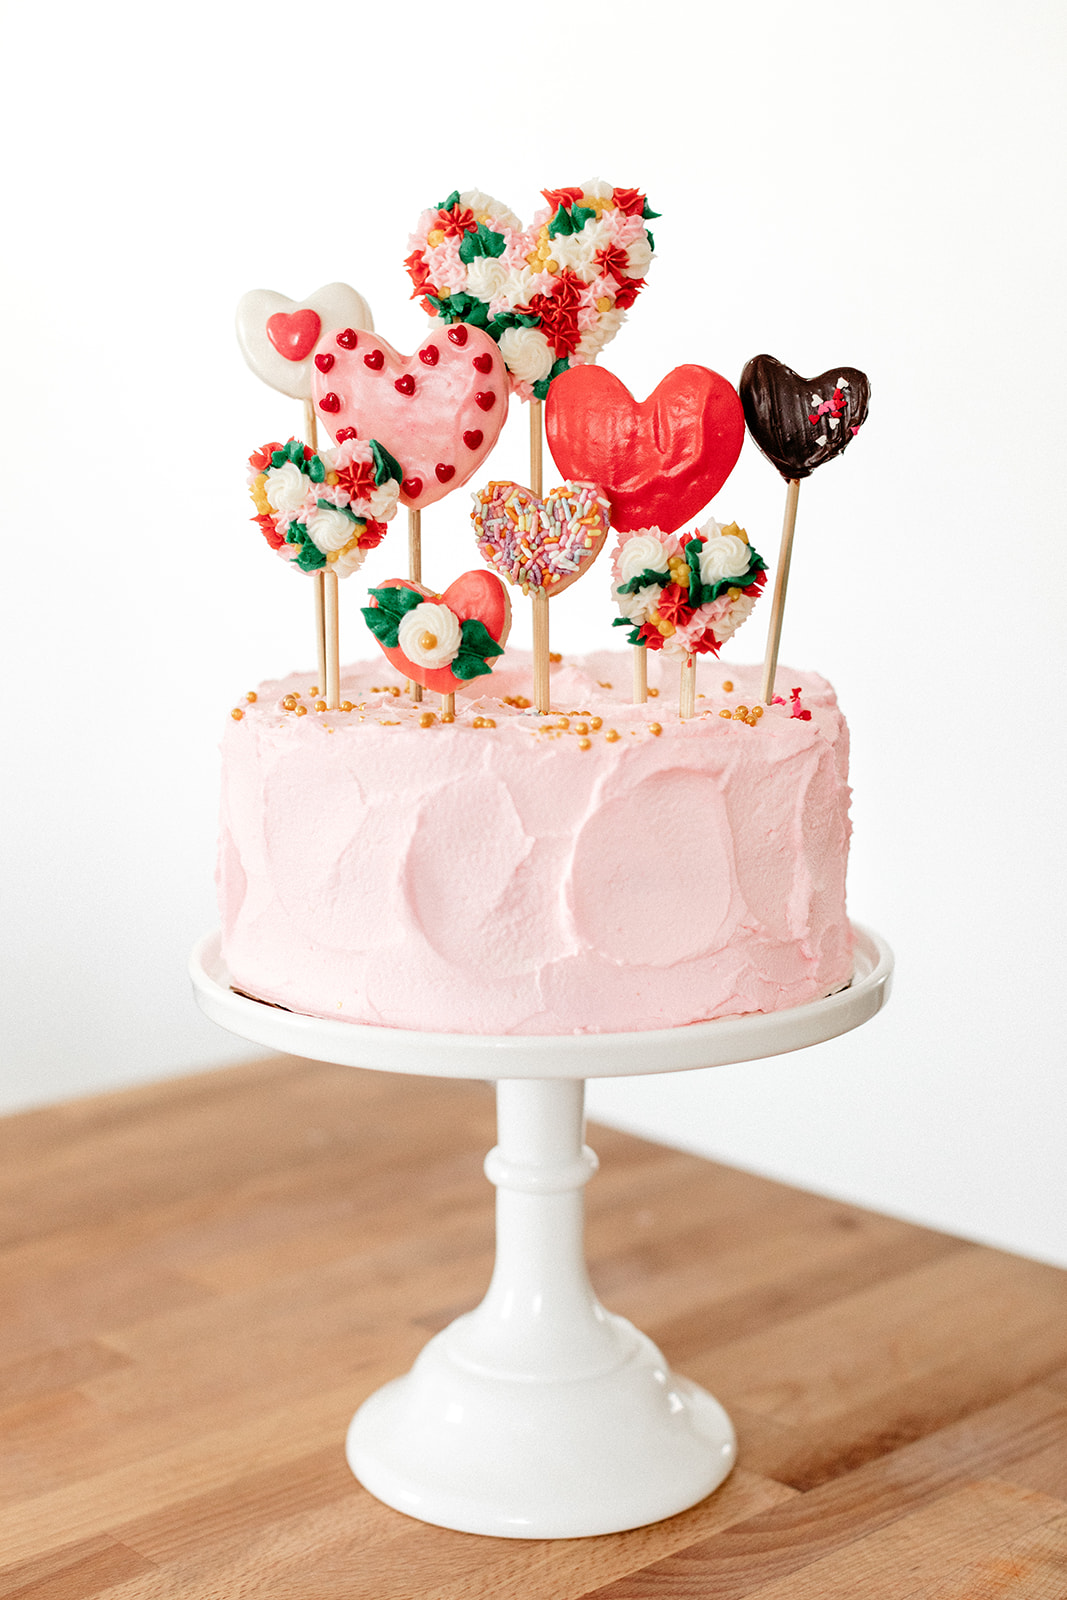 Valentines Day Gifts For Him | Valentines Day Gifts for Her | Yummy Cake-mncb.edu.vn